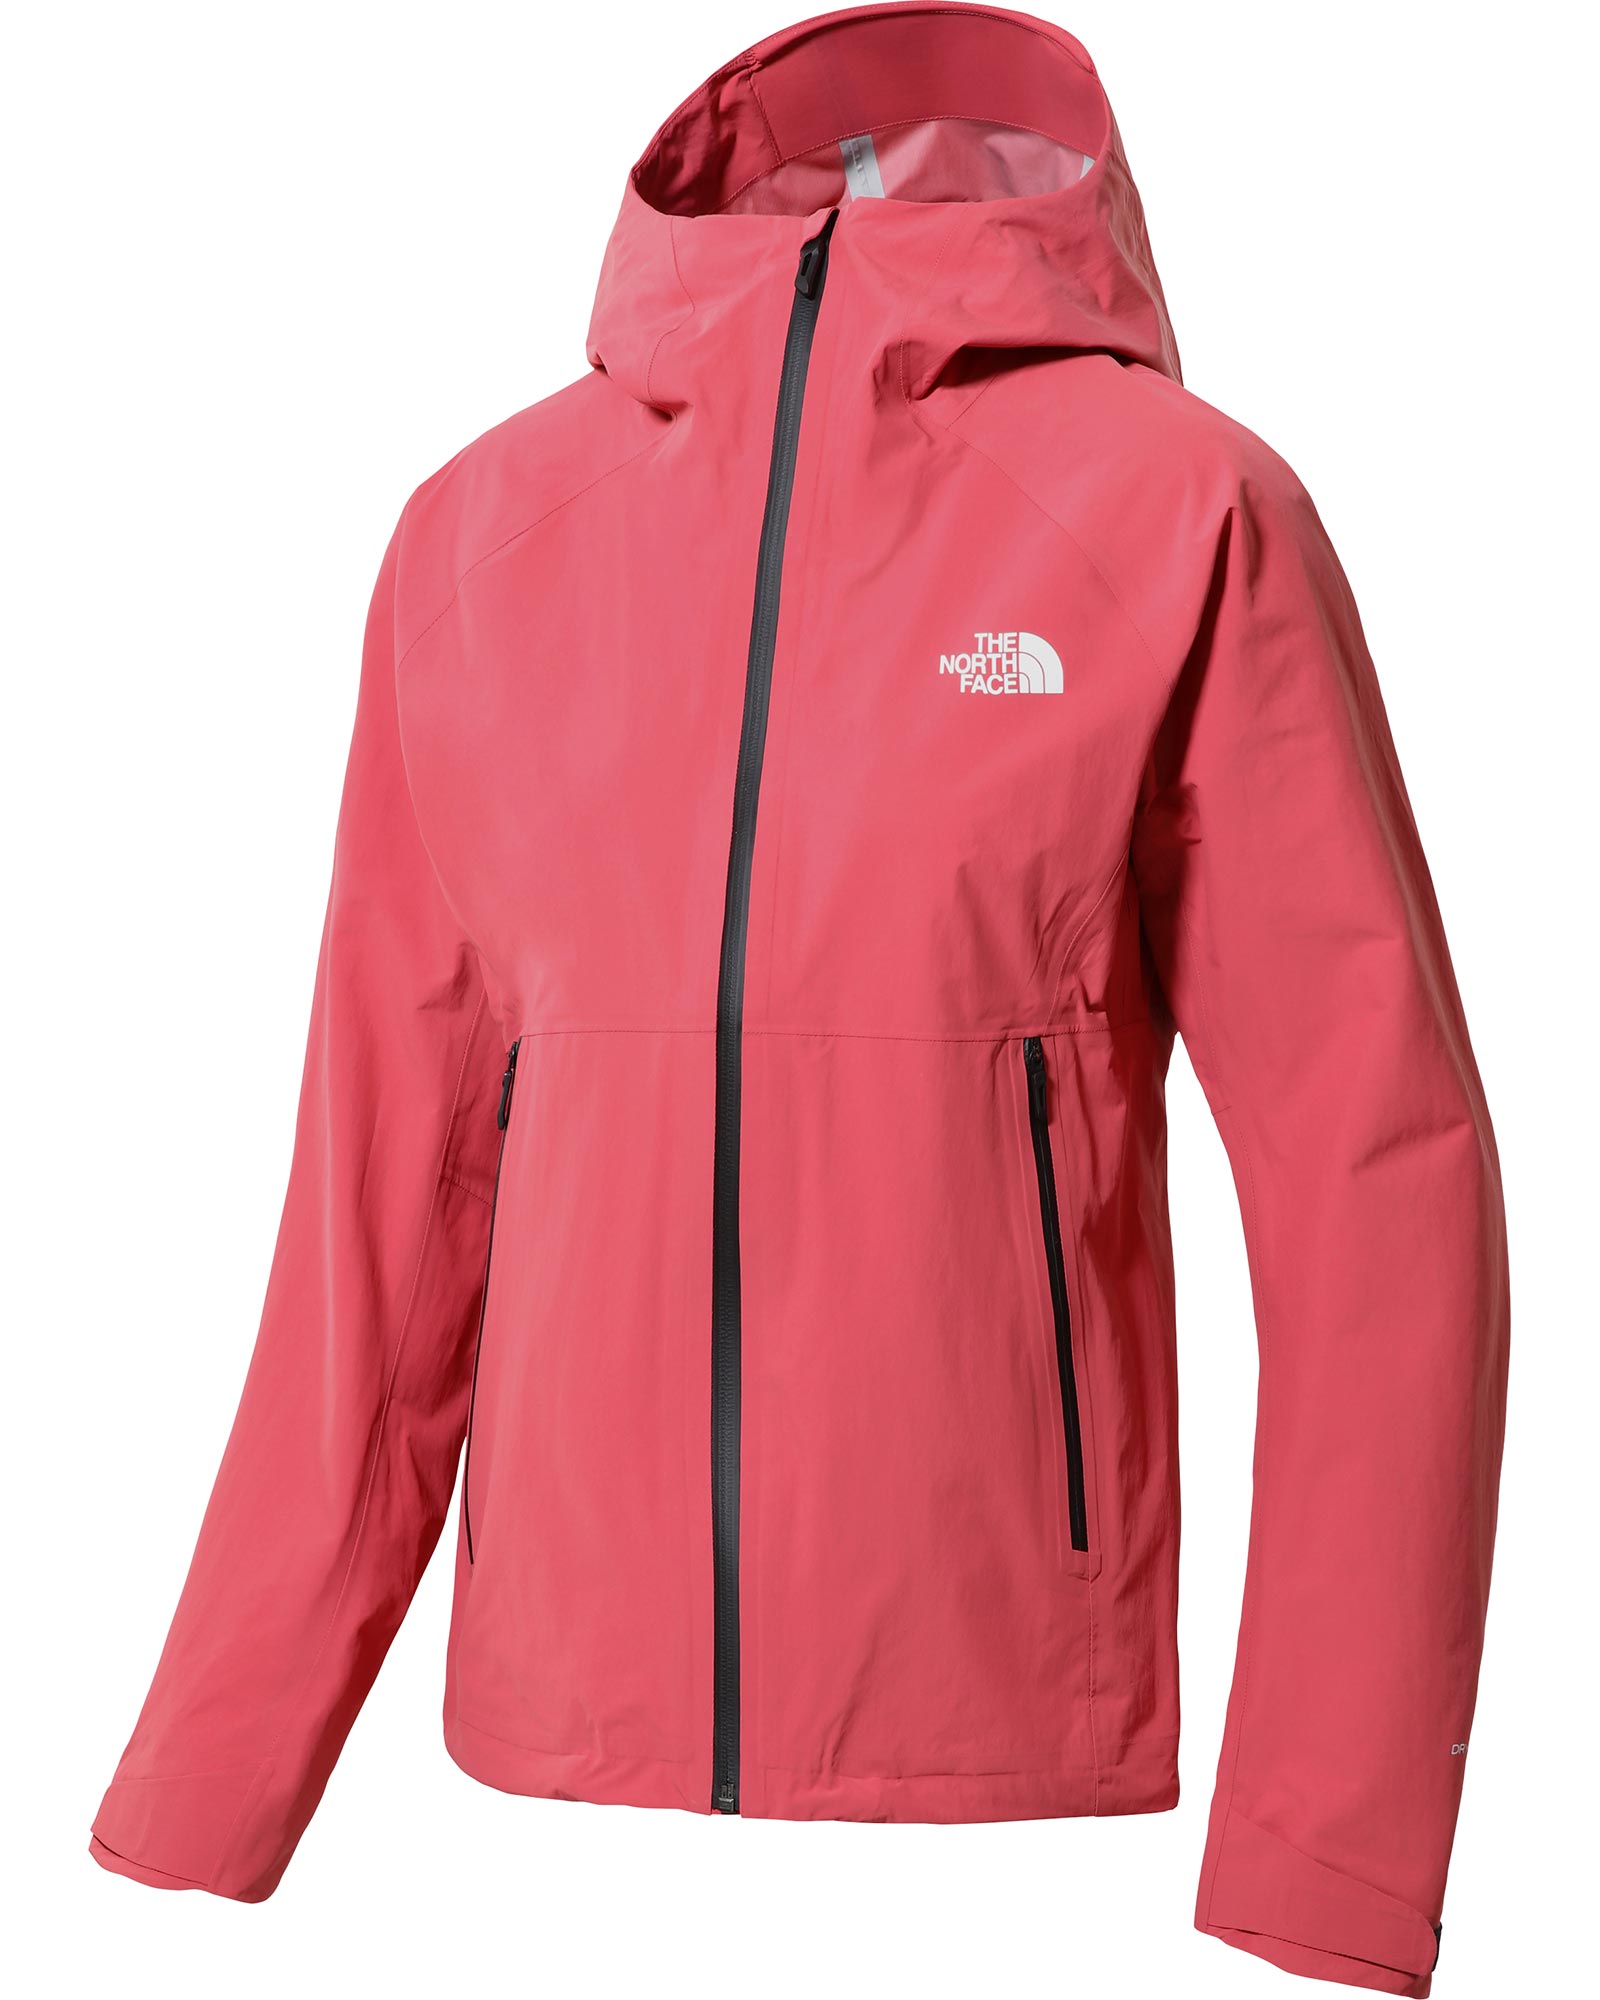 The North Face Circadian 2.5L Women’s Jacket - Slate Rose L